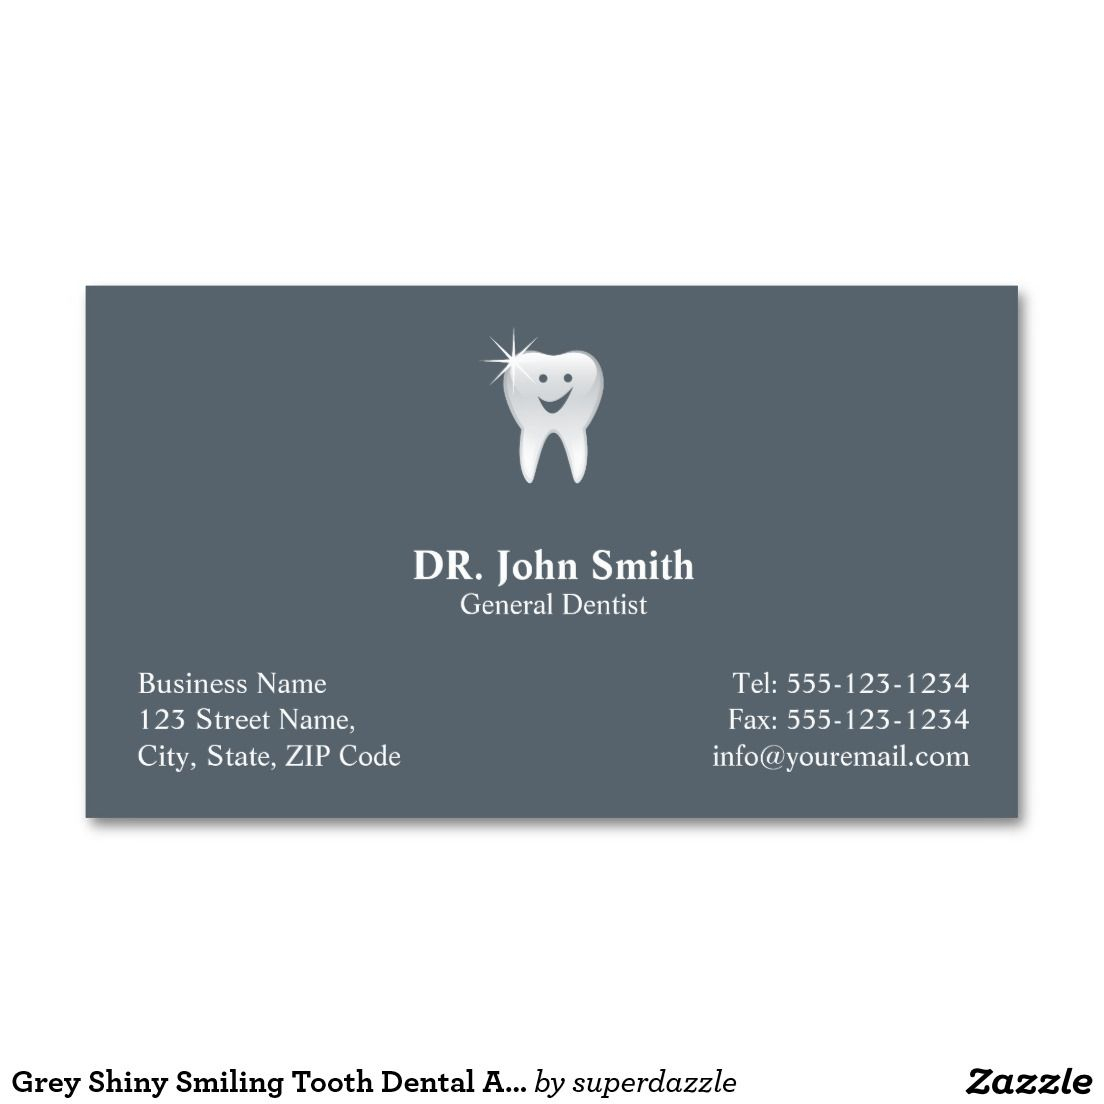 Grey Shiny Smiling Tooth Dental Appointment | Zazzle With Dentist Appointment Card Template